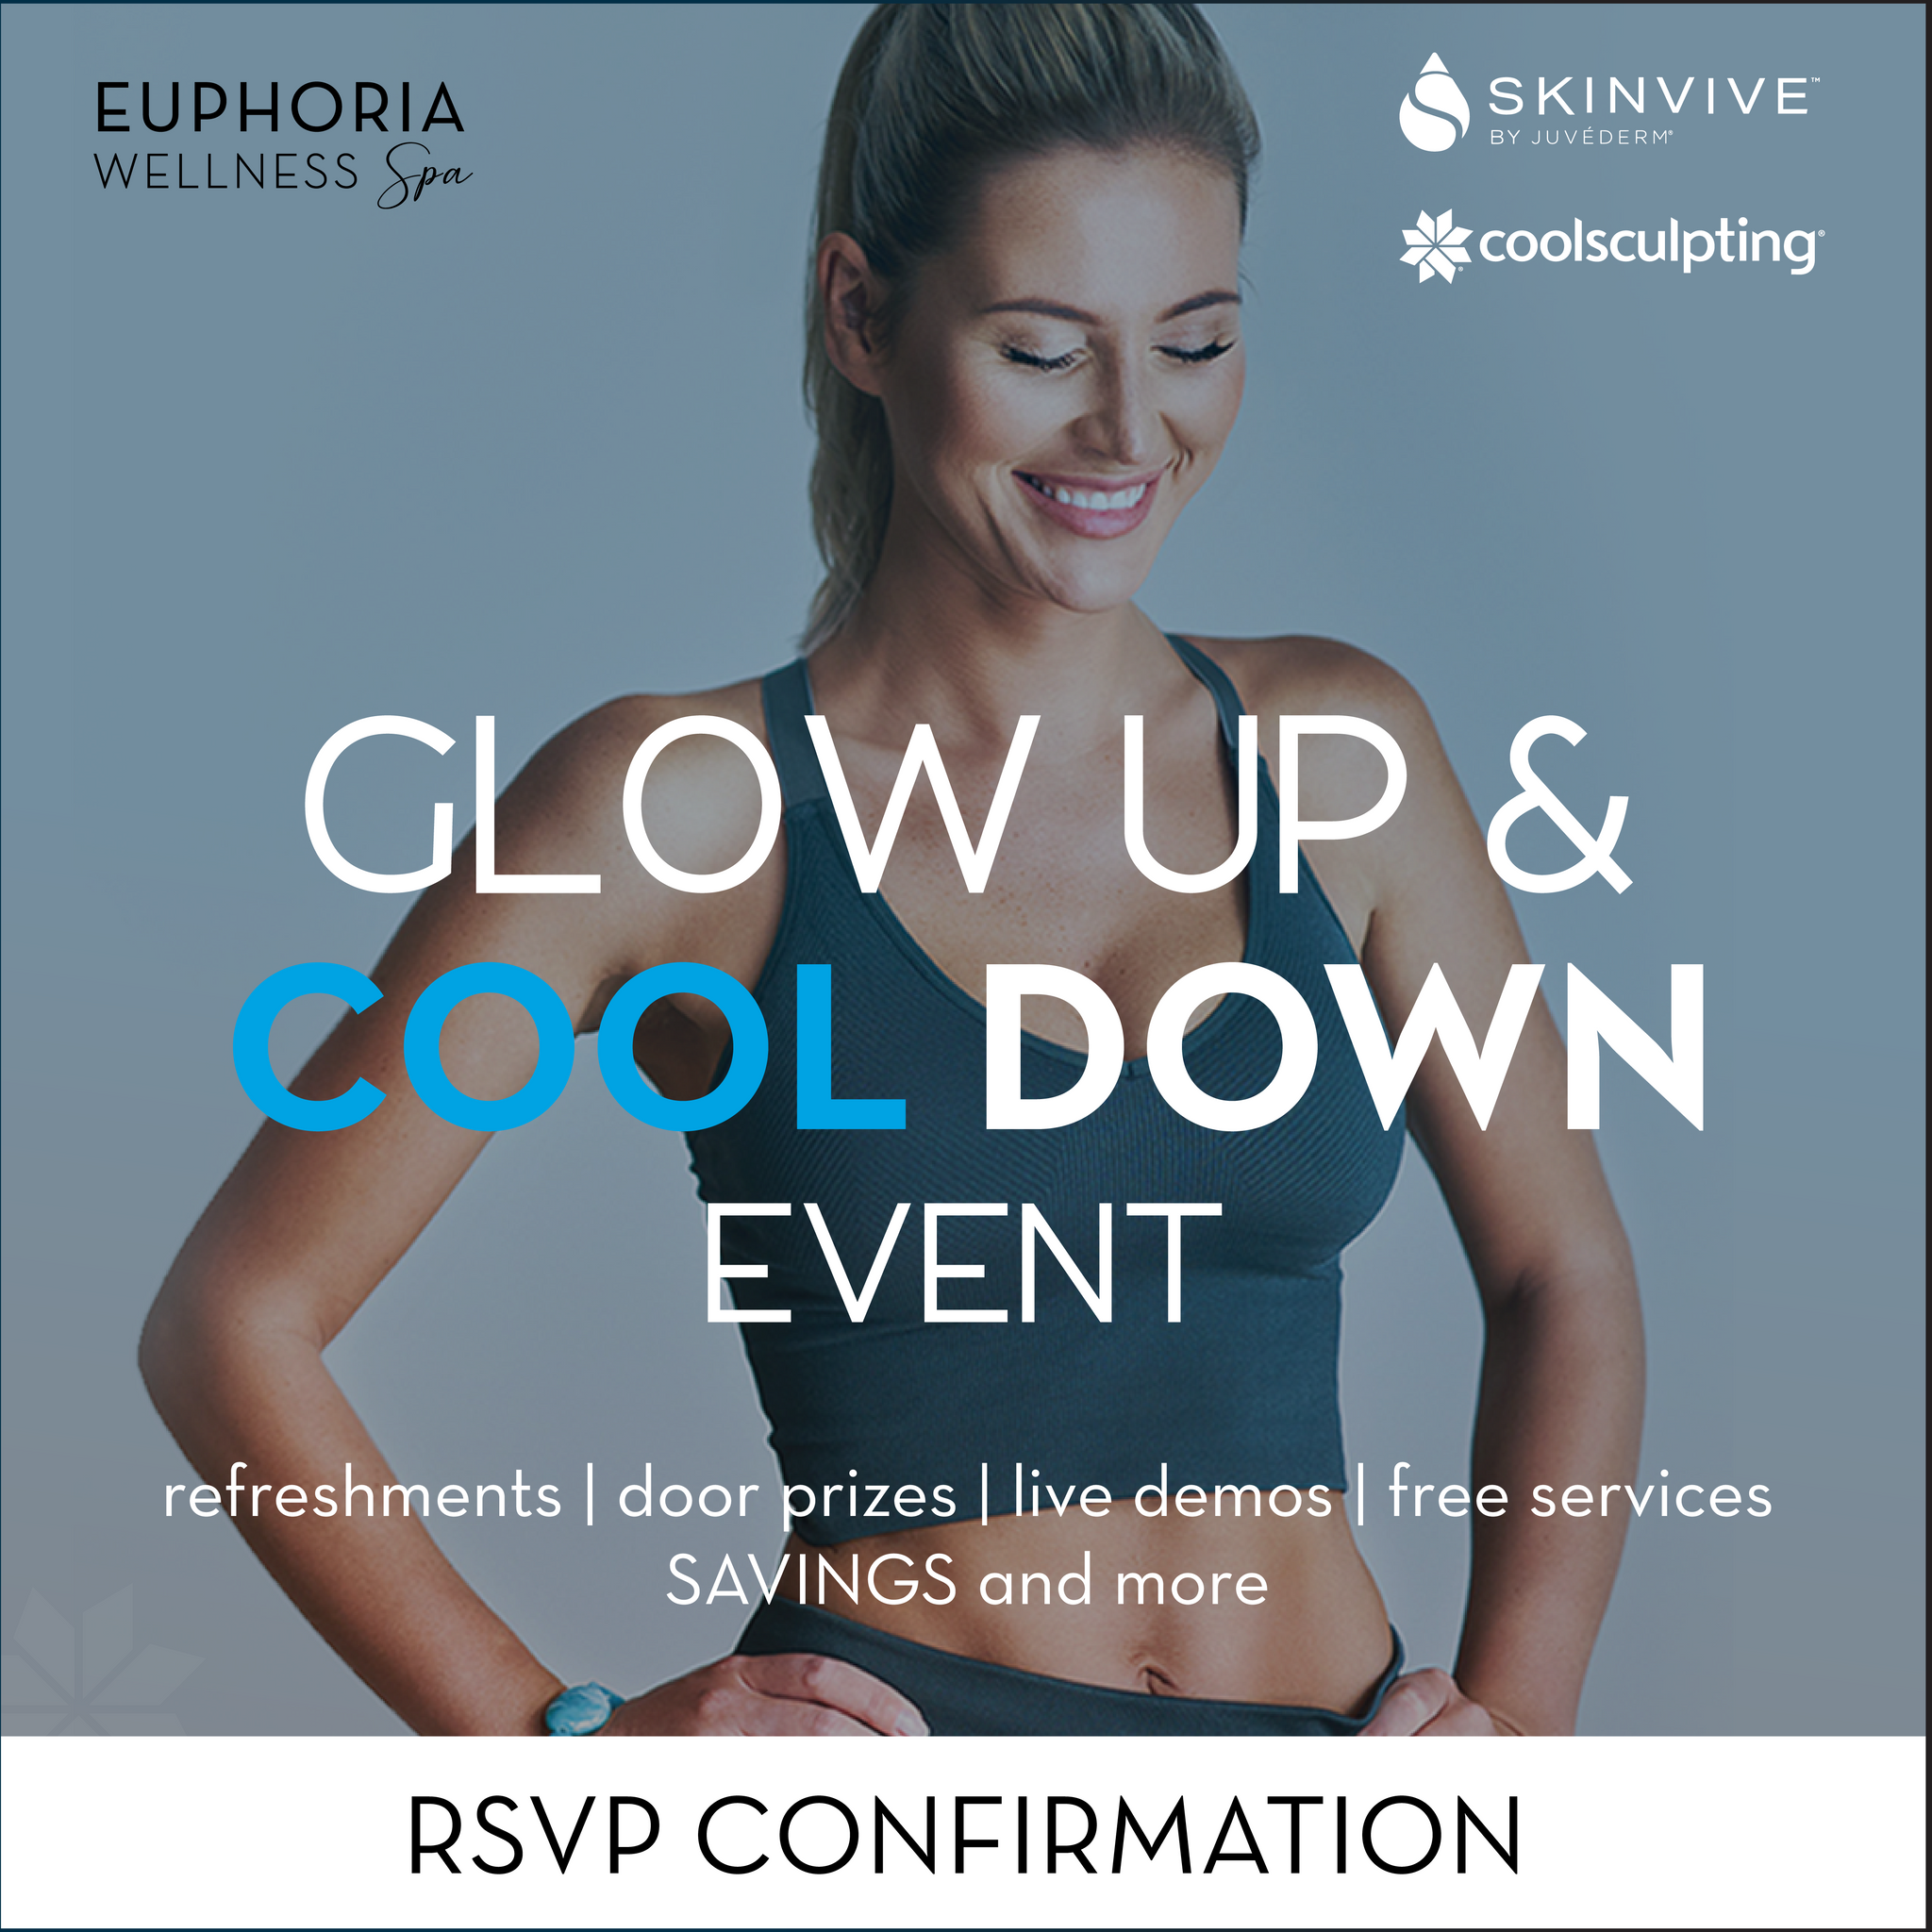 Glow Up and COOL Down Event - April 24th, 4-7 p.m.